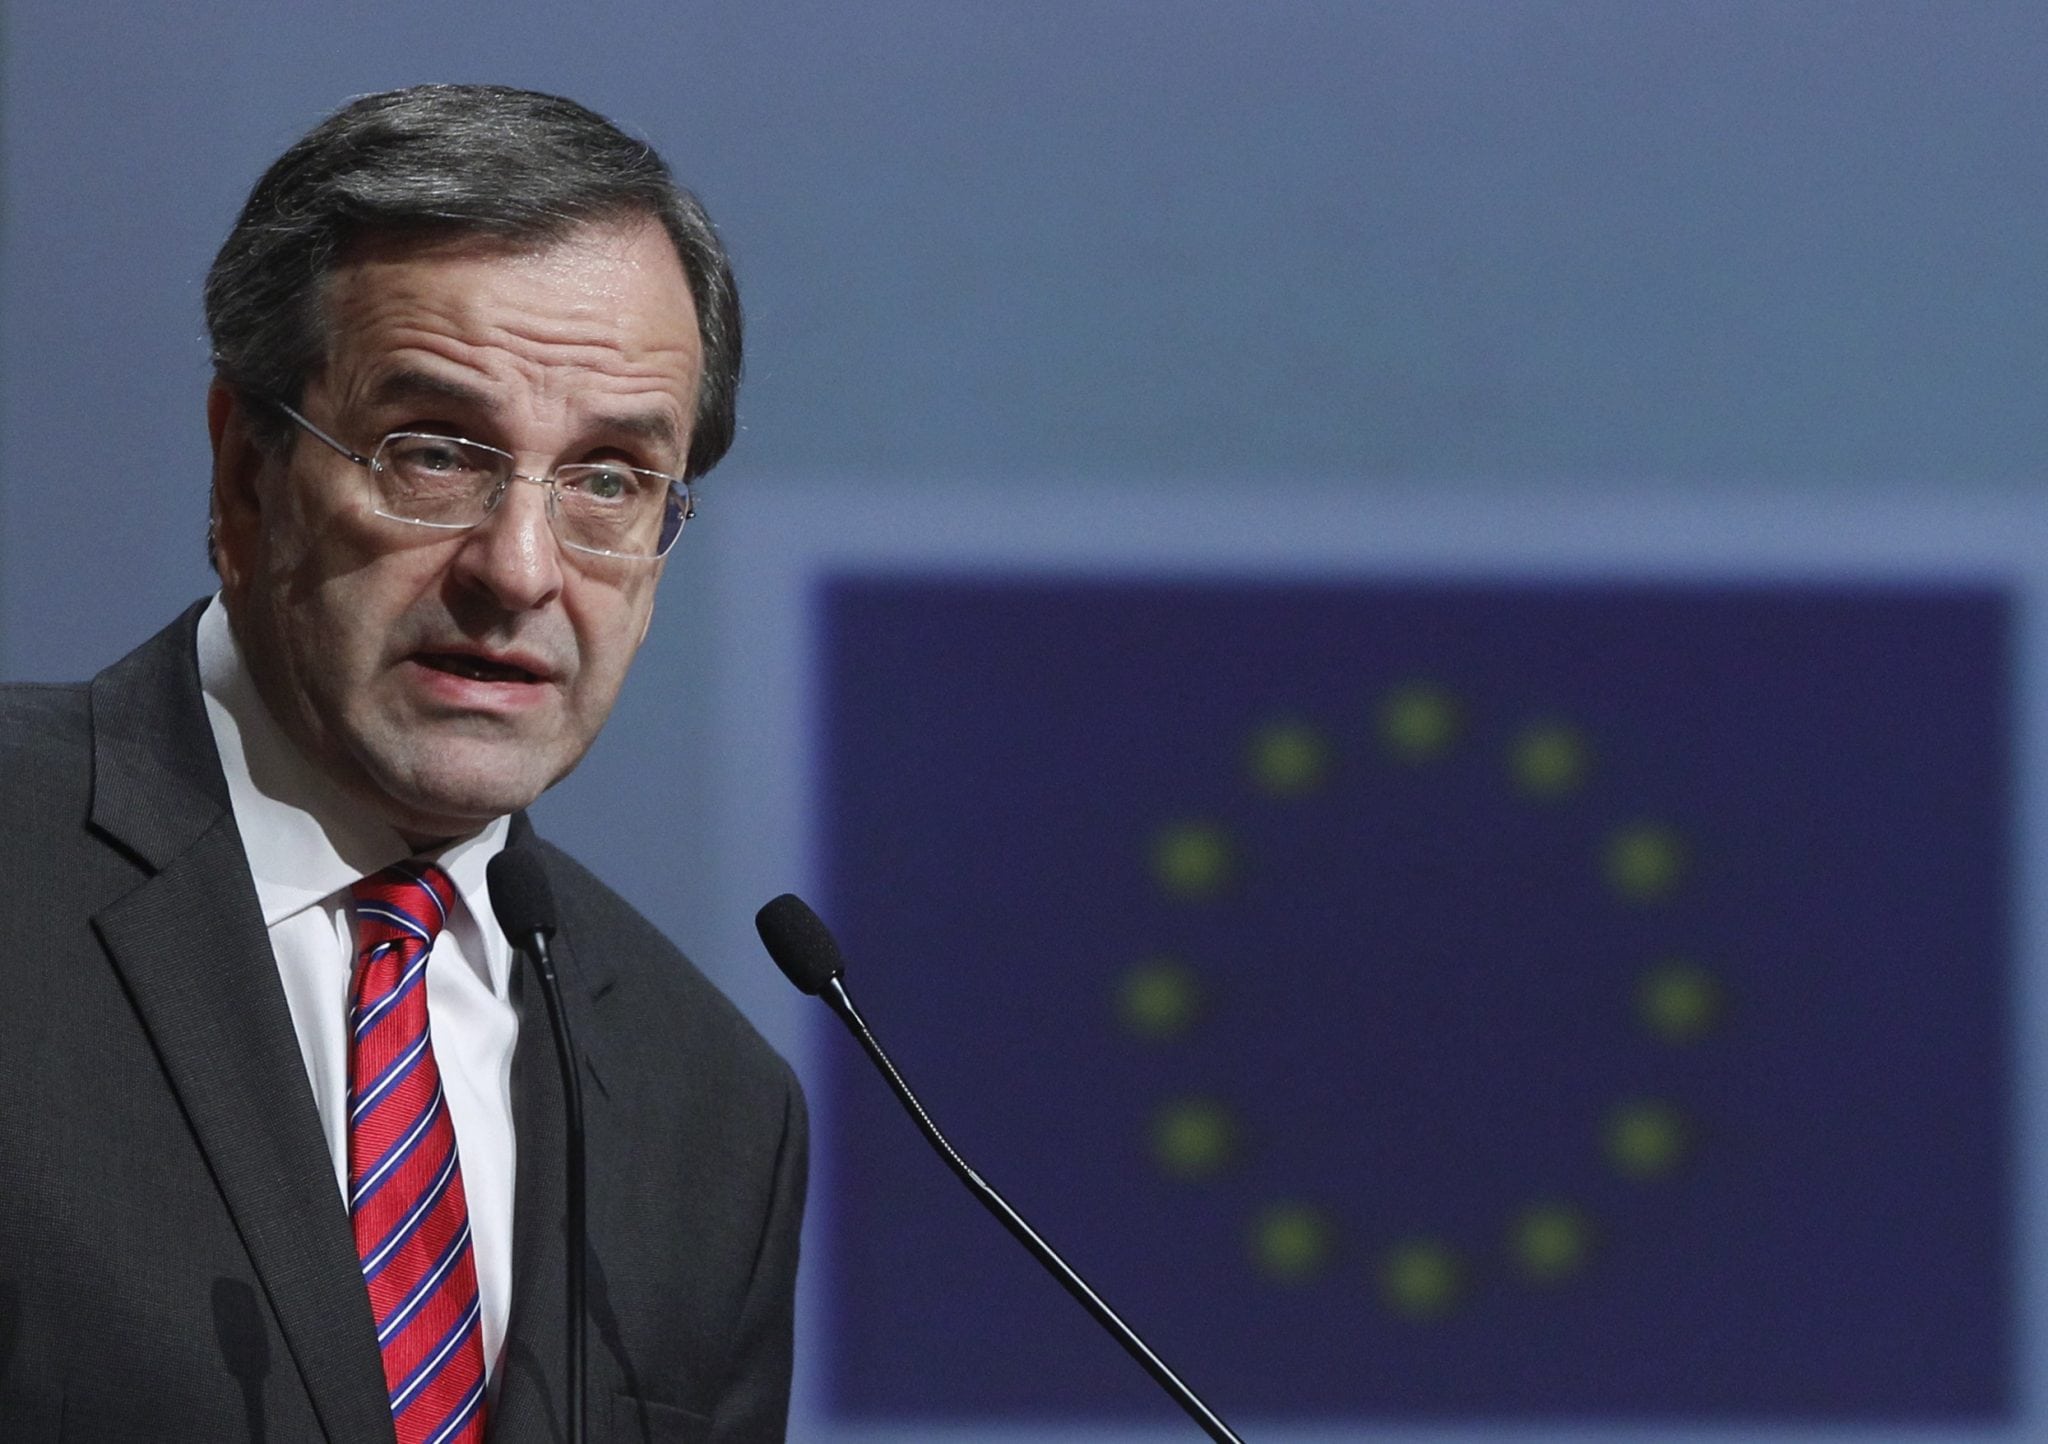 Greece's Prime Minister Antonis Samaras delivers his speech at the Athens Concert Hall.